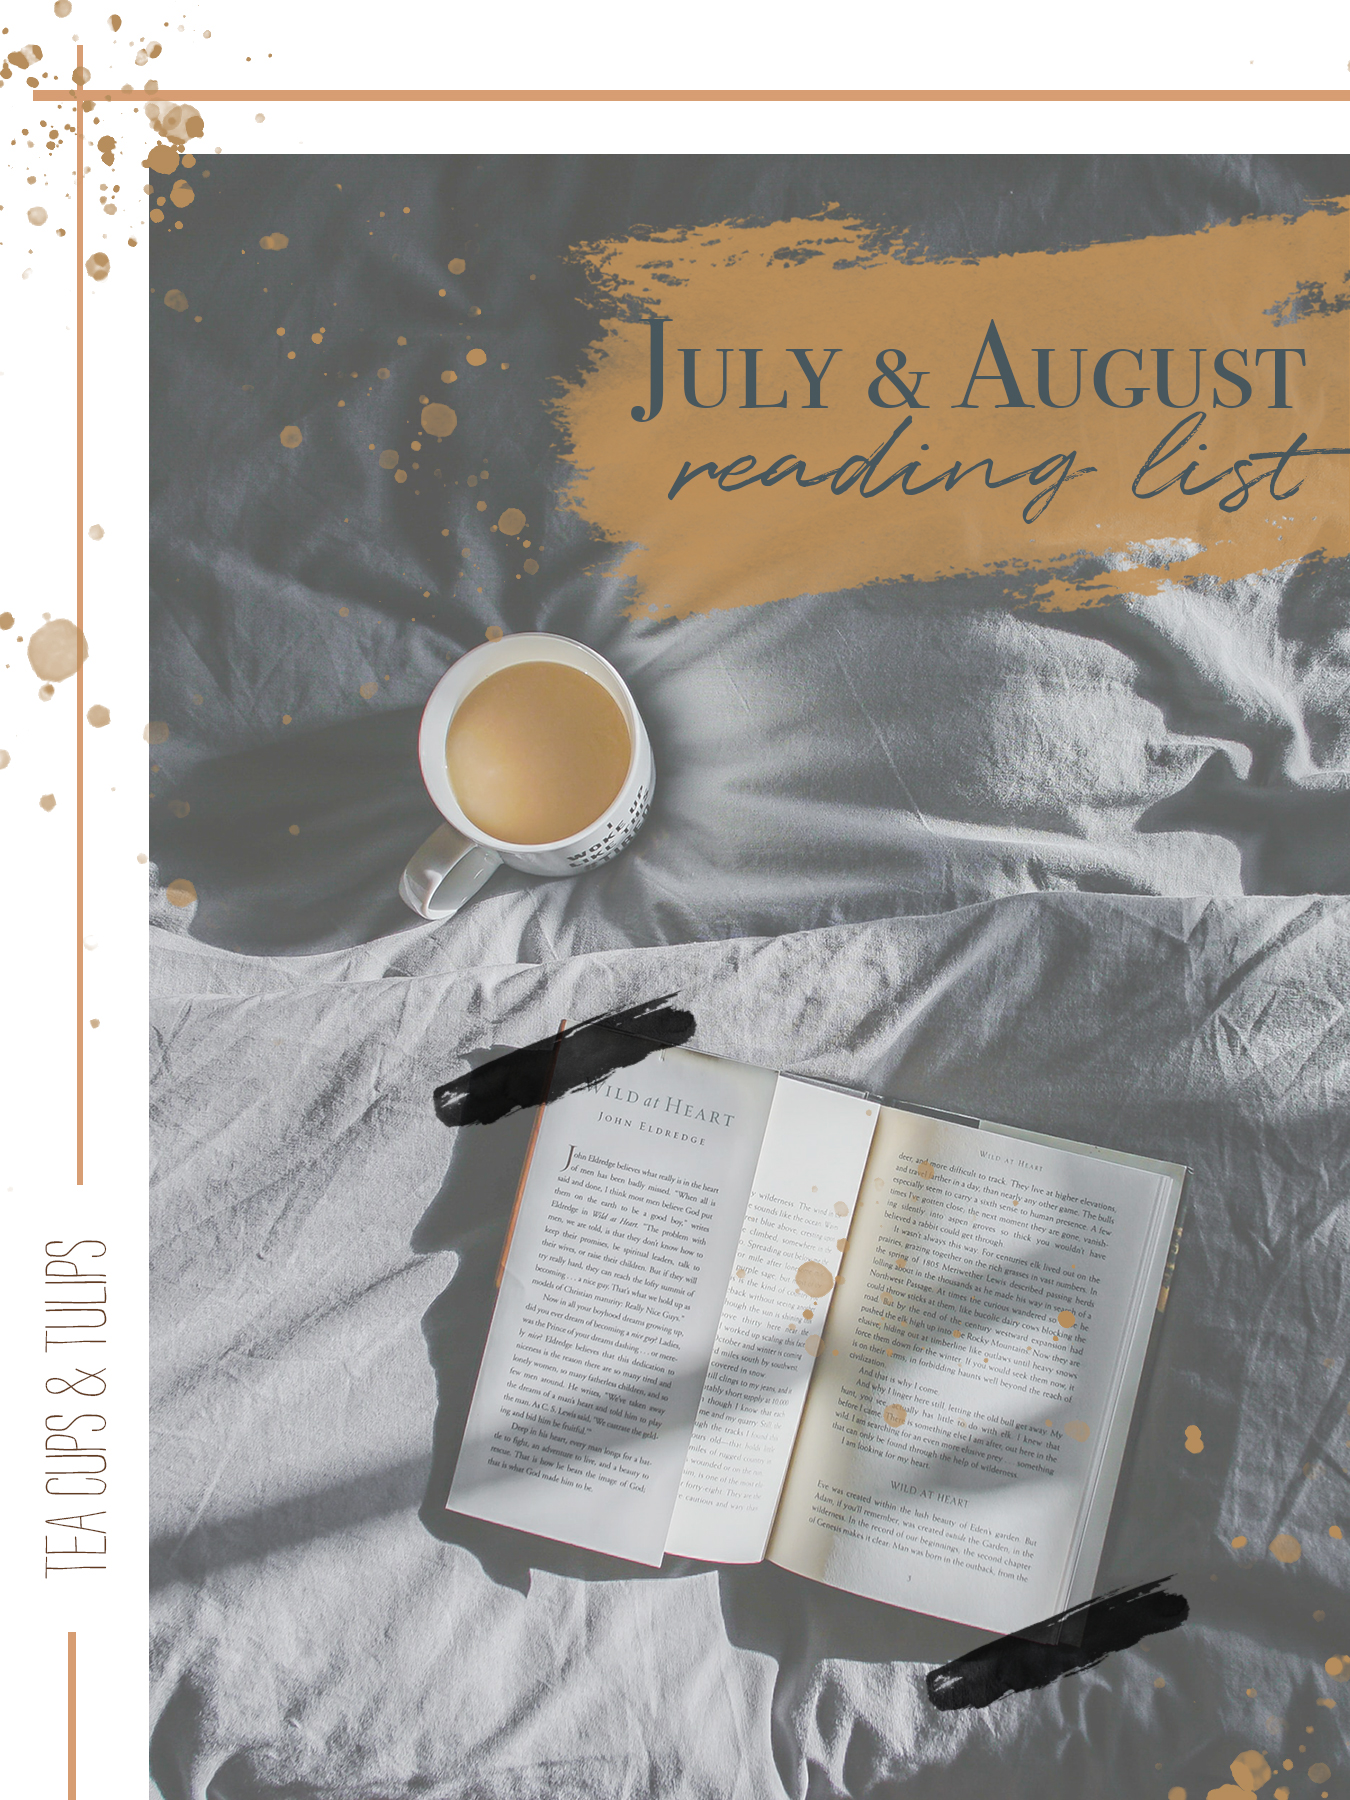 July and August reading list